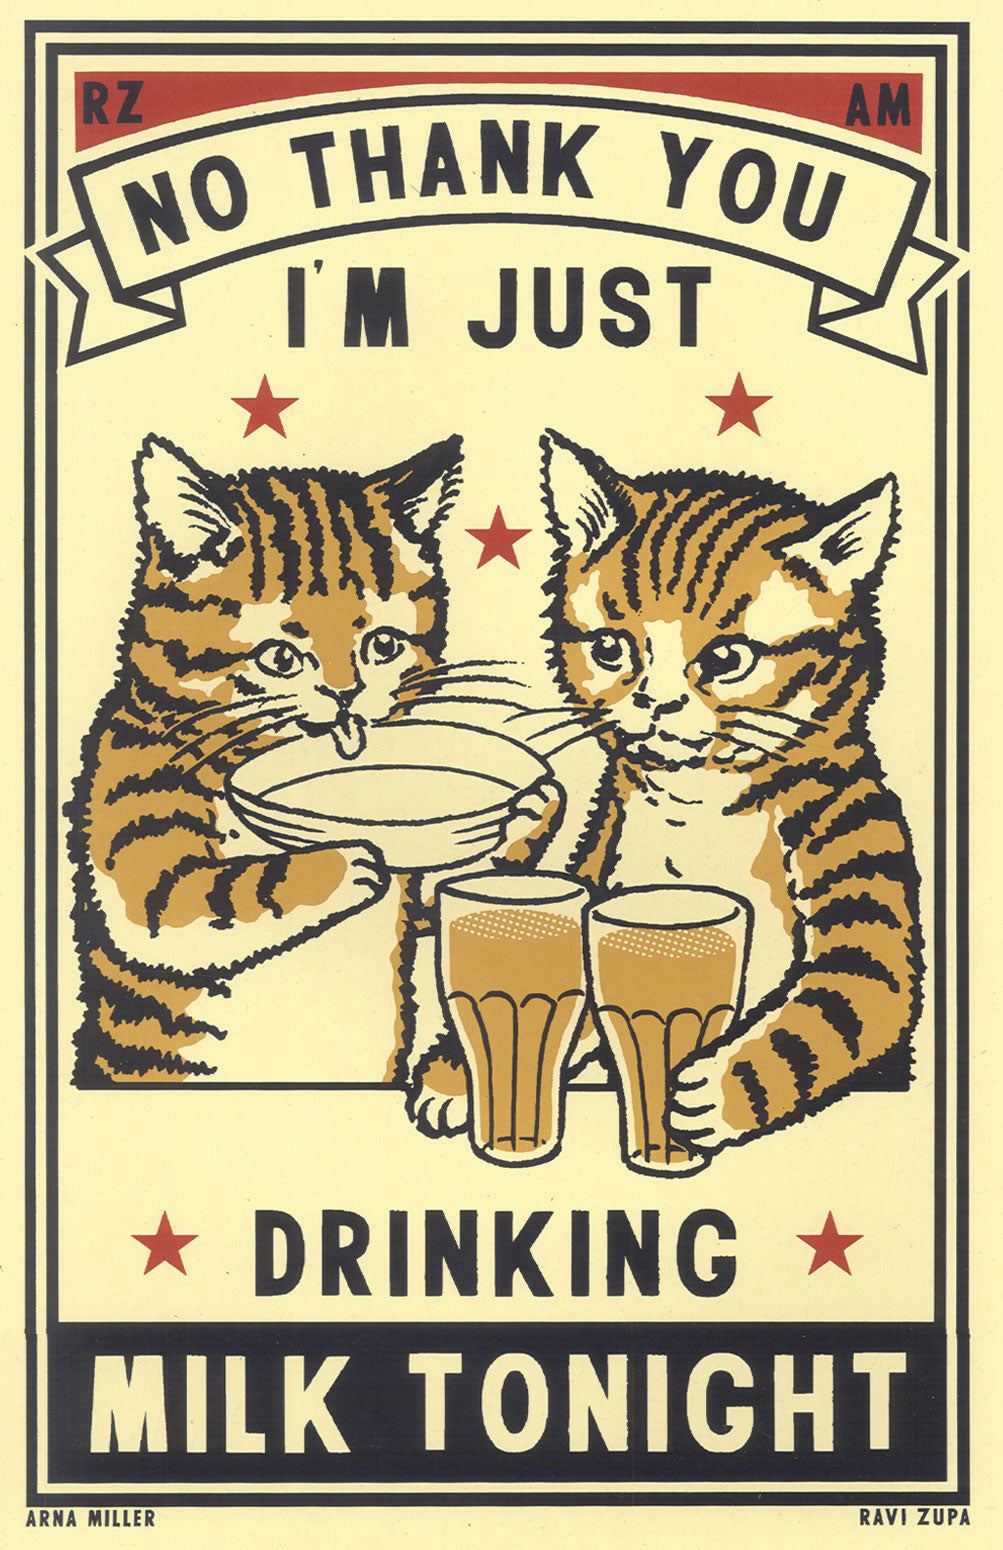 Drunk Cat Series Print - No, Thank You, I'm Just Drinking Milk Tonight - By Arna Miller and Ravi Zupa